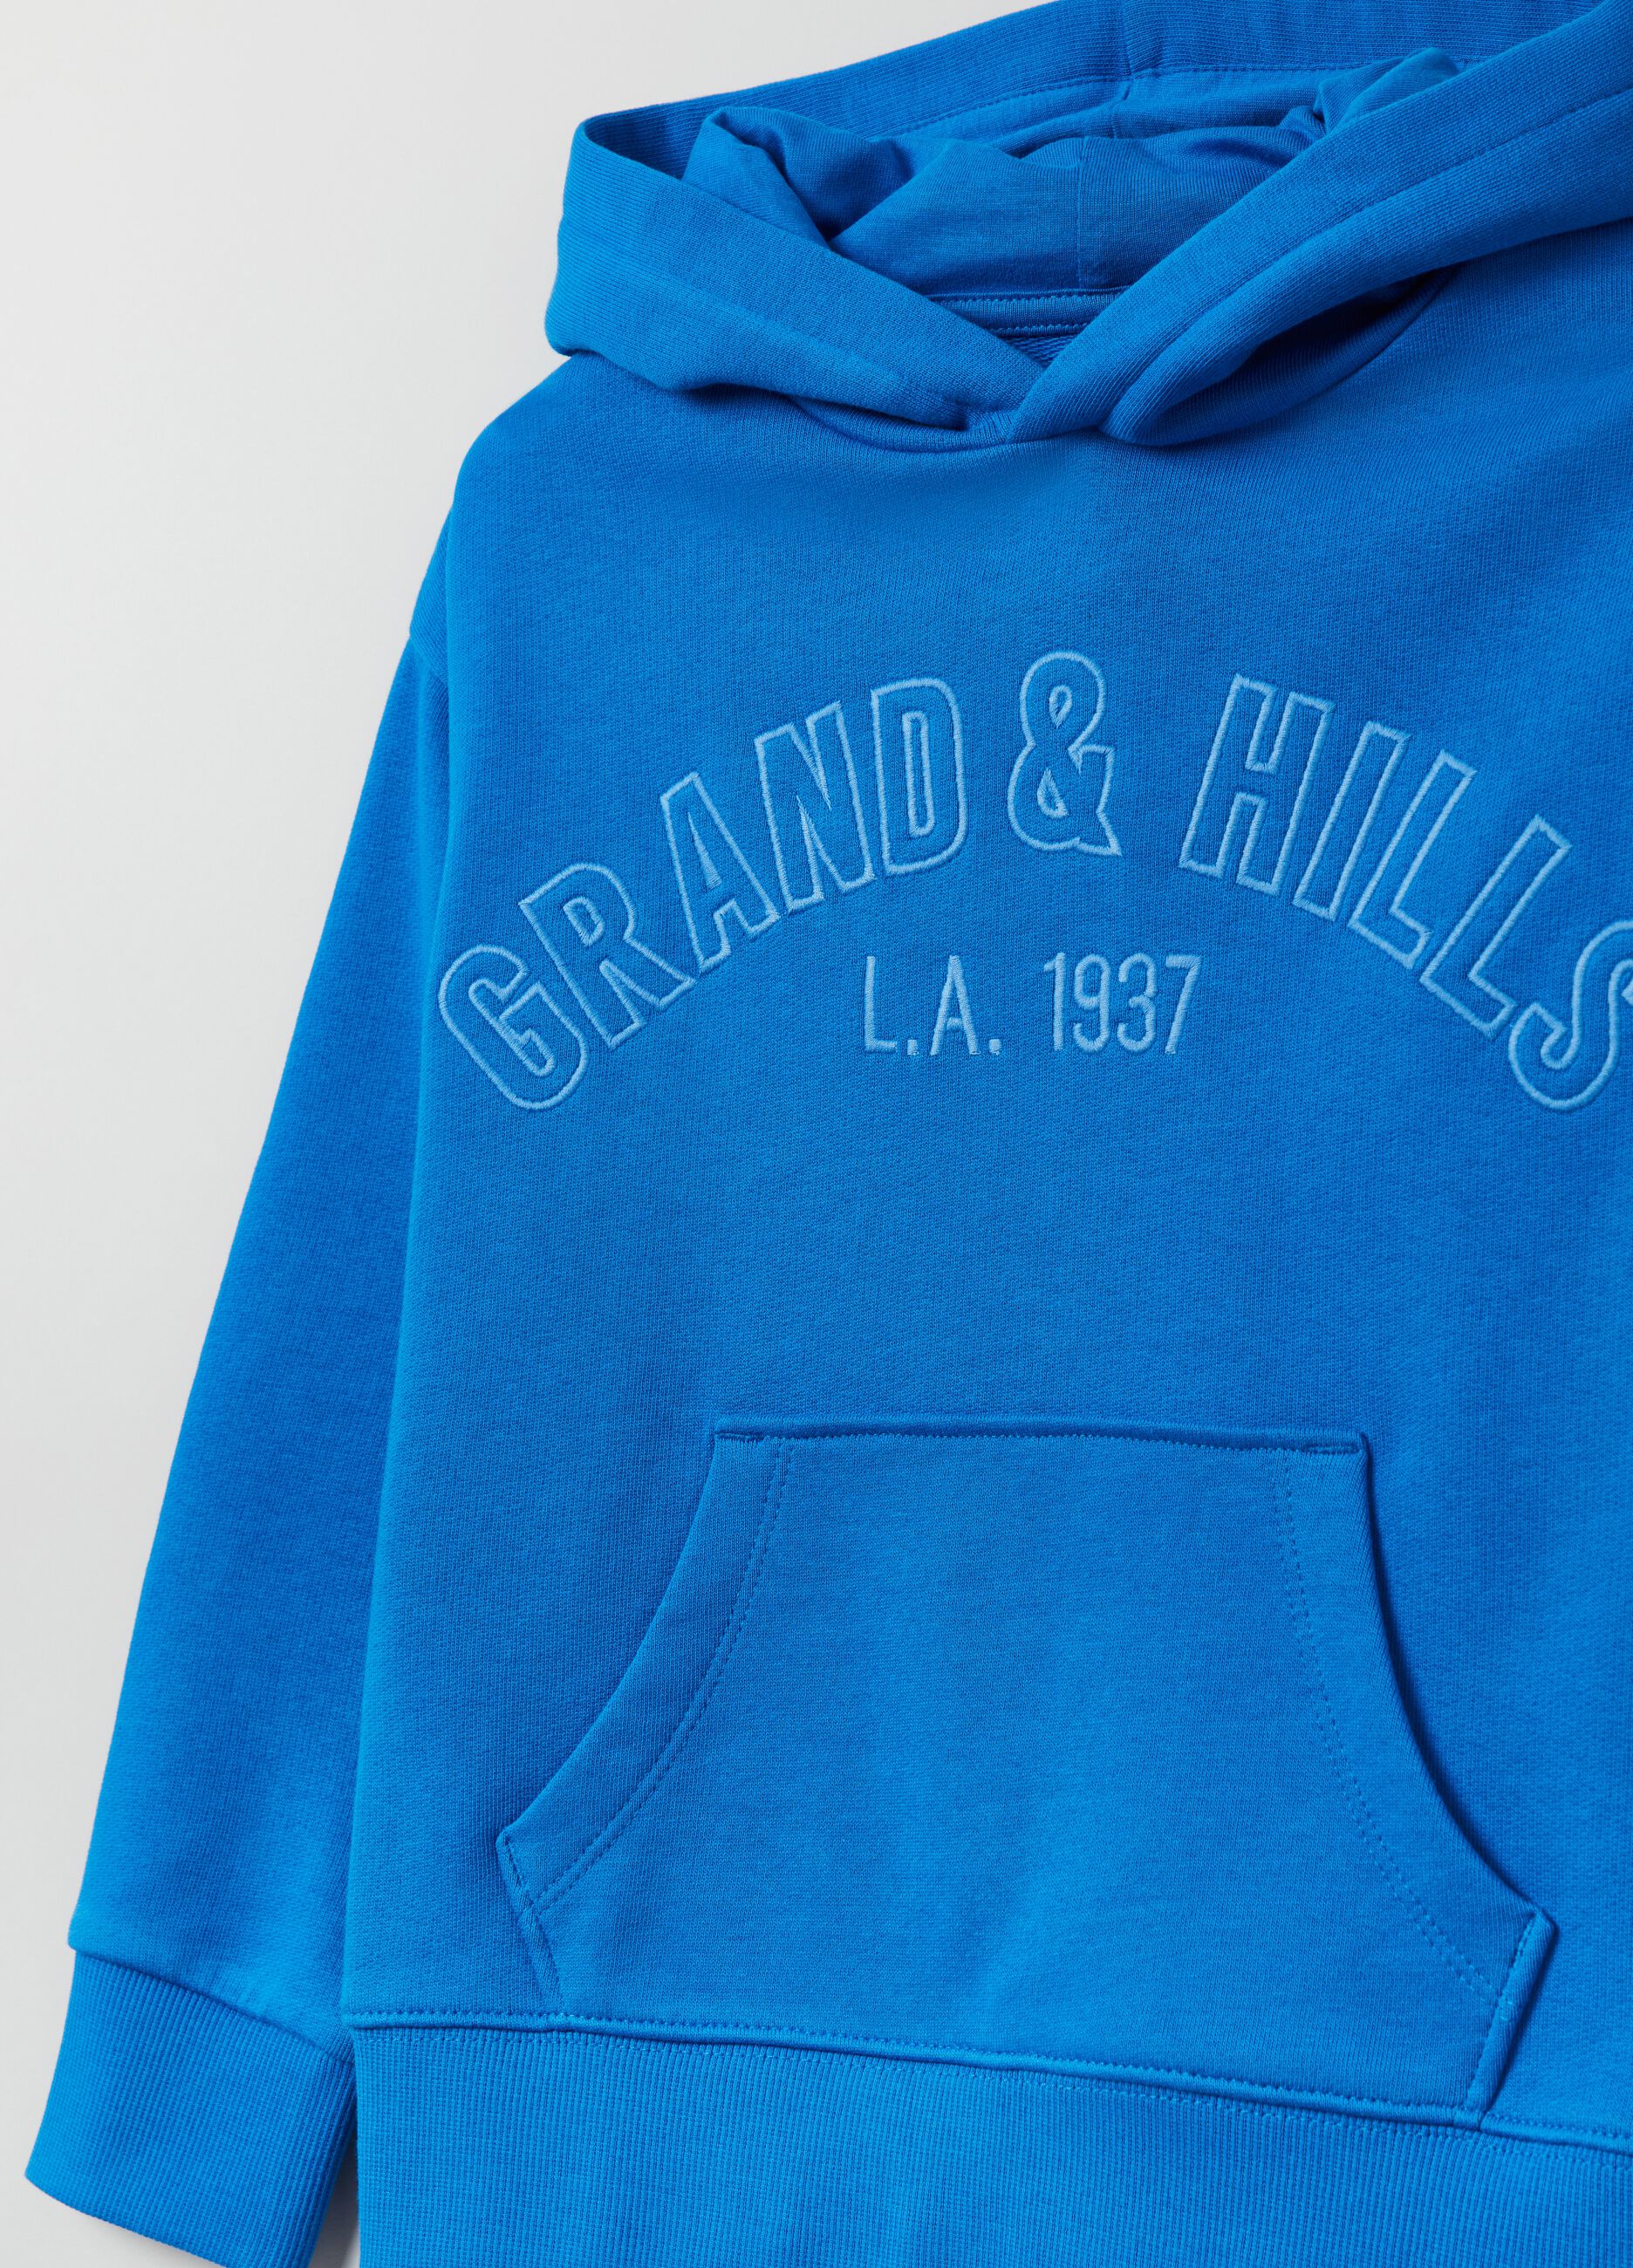 Hoodie with Grand&Hills embroidery